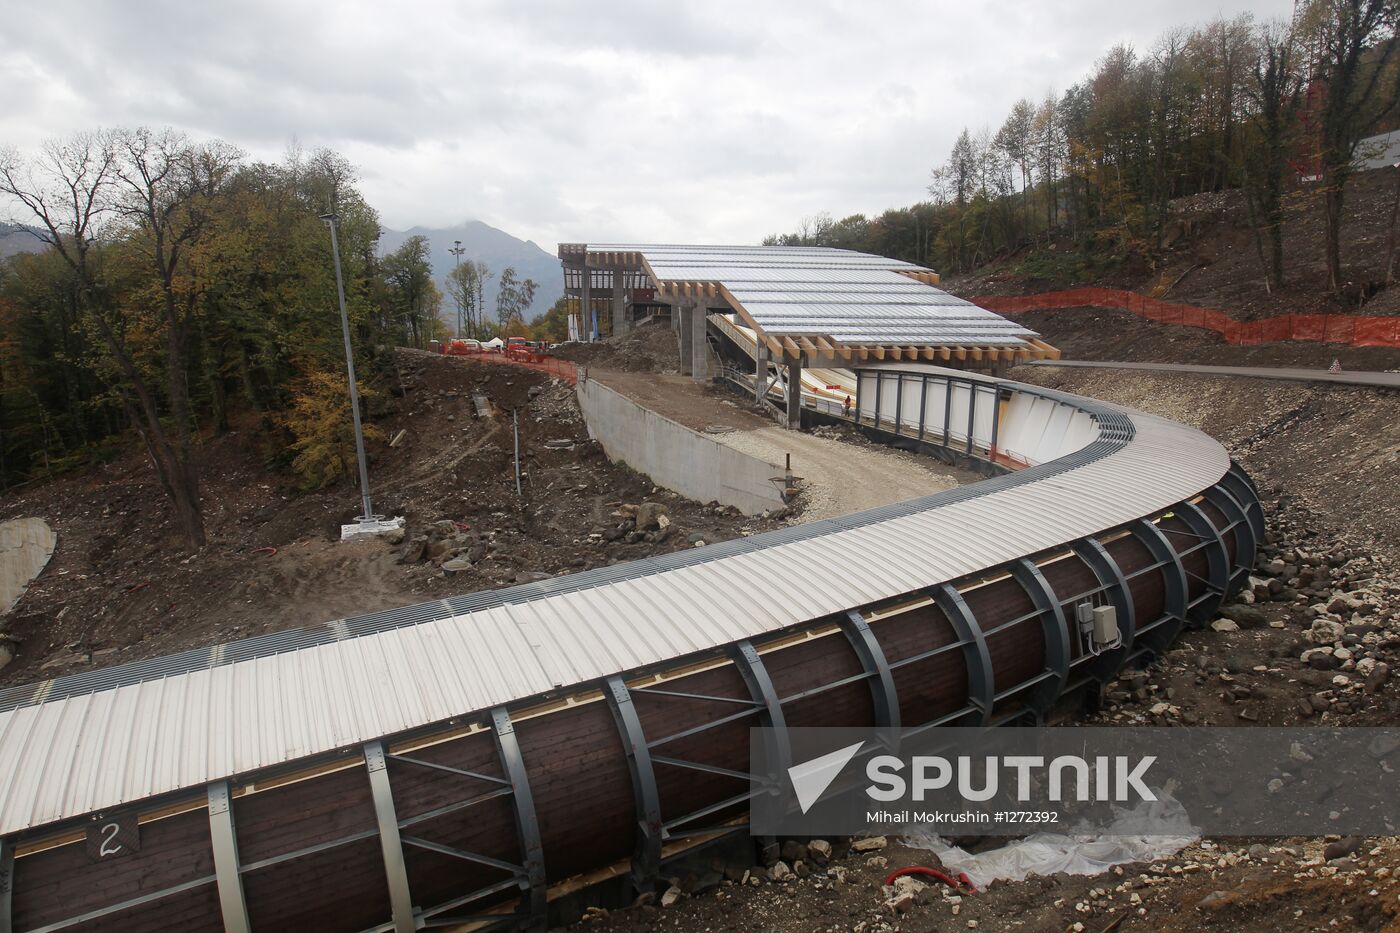 Bobsleigh and luge track "Sanki" in Sochi